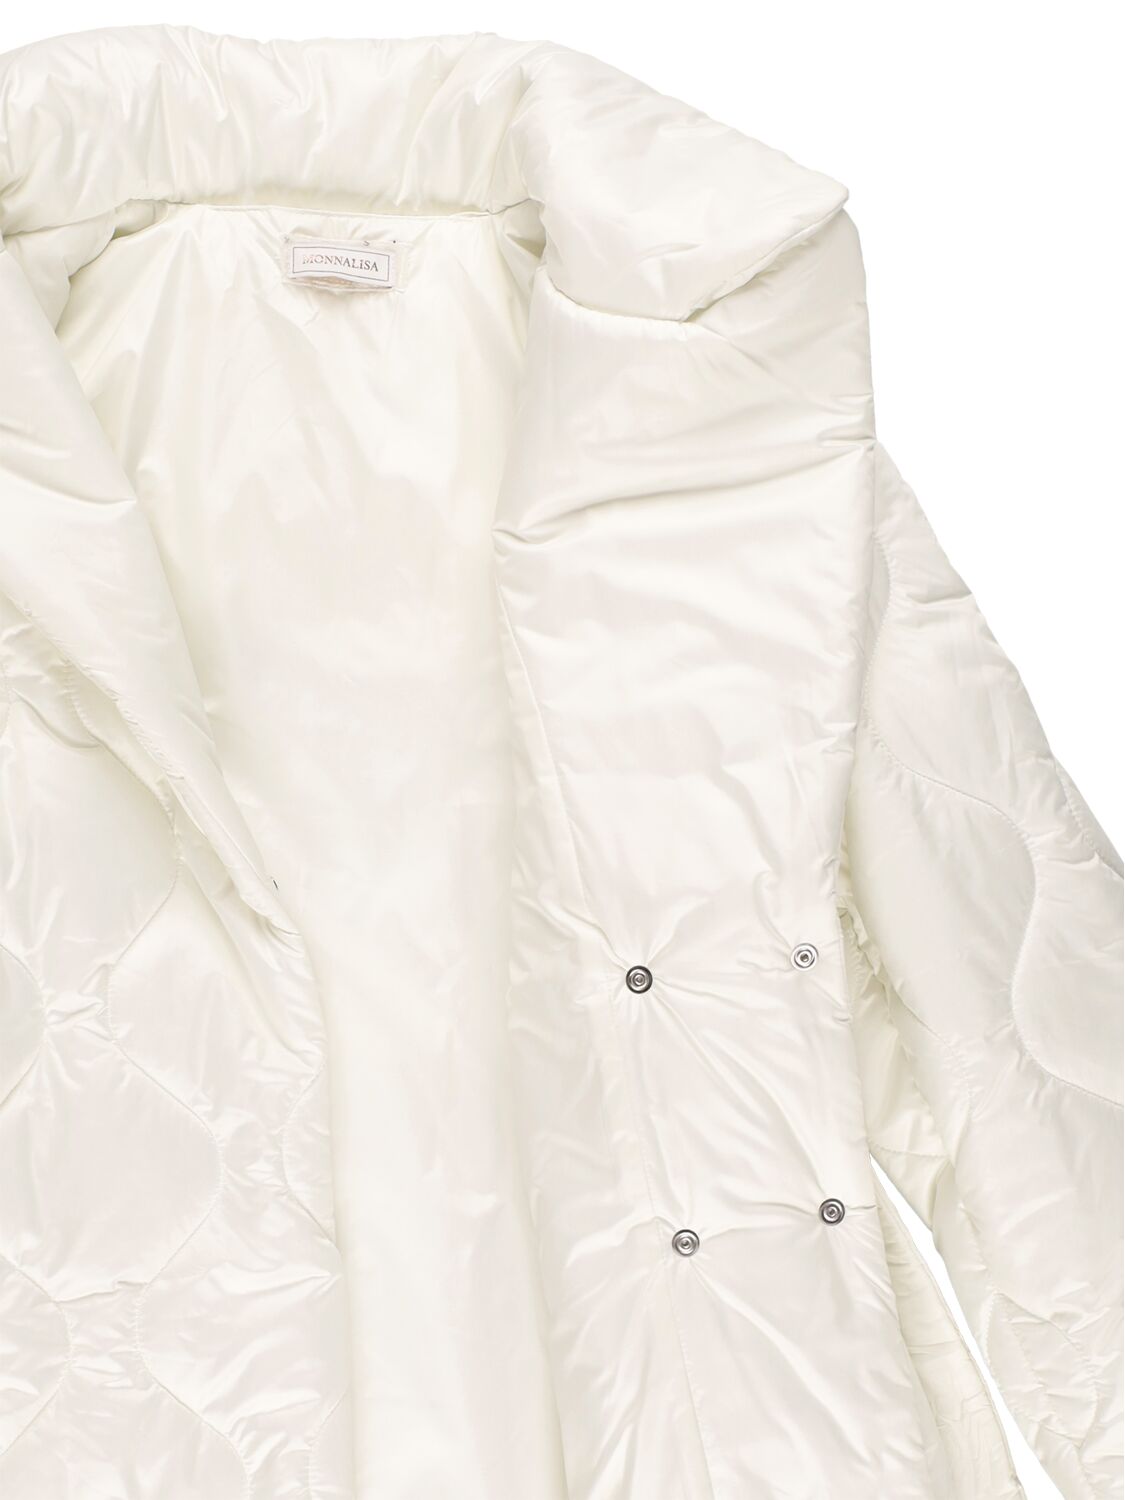 Shop Monnalisa Quilted Nylon Puffer Coat W/ Belt In White